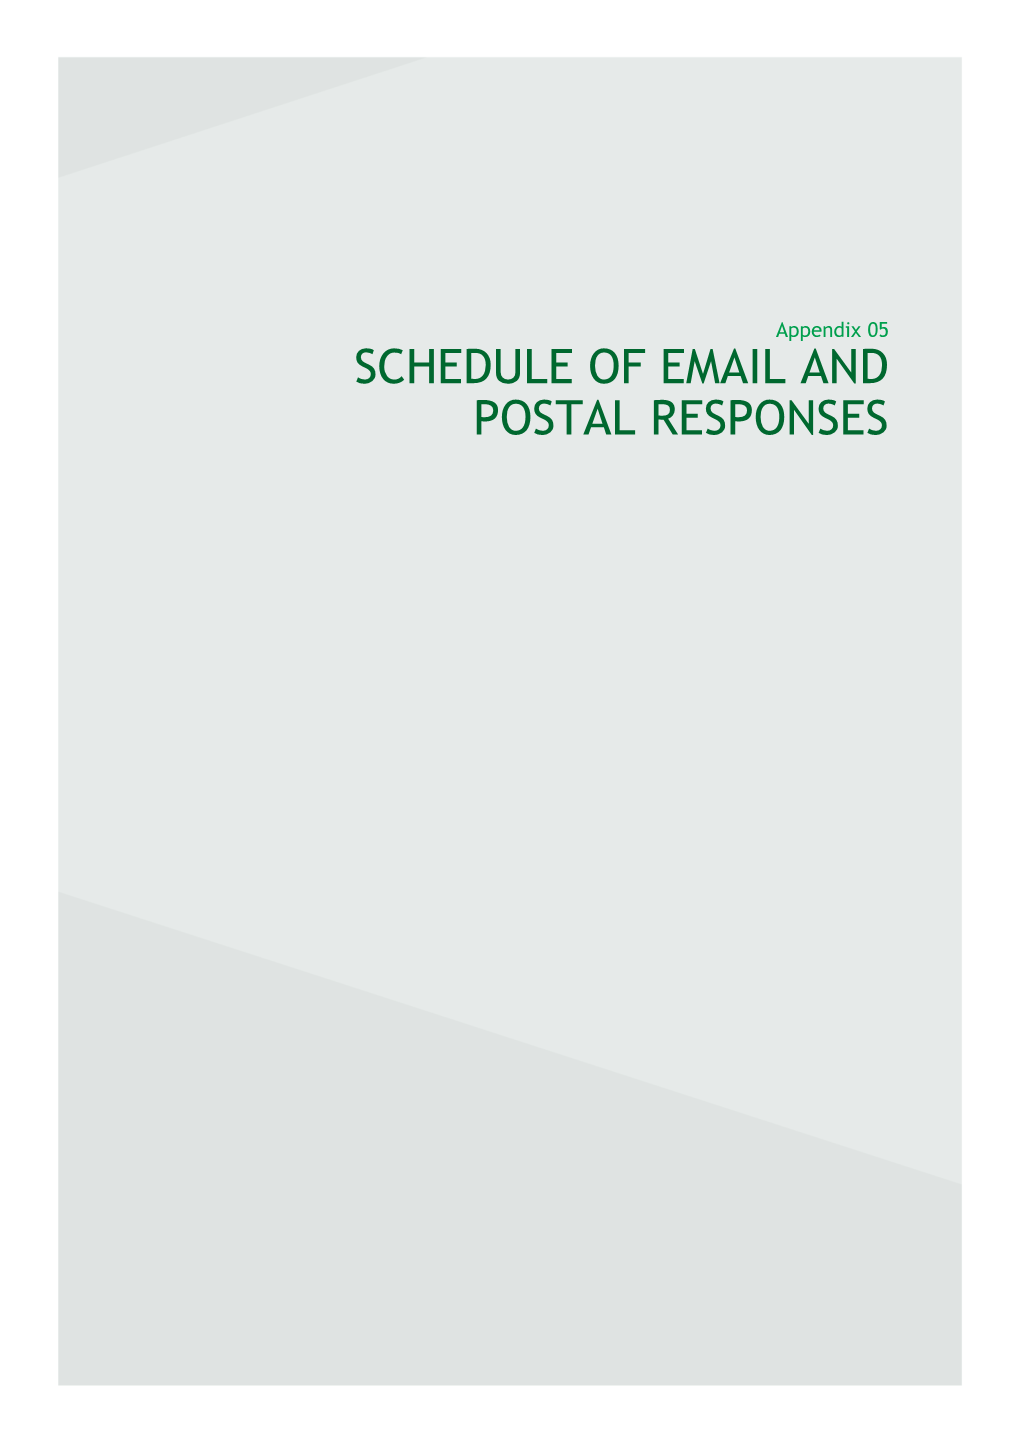 Schedule of Email and Postal Responses